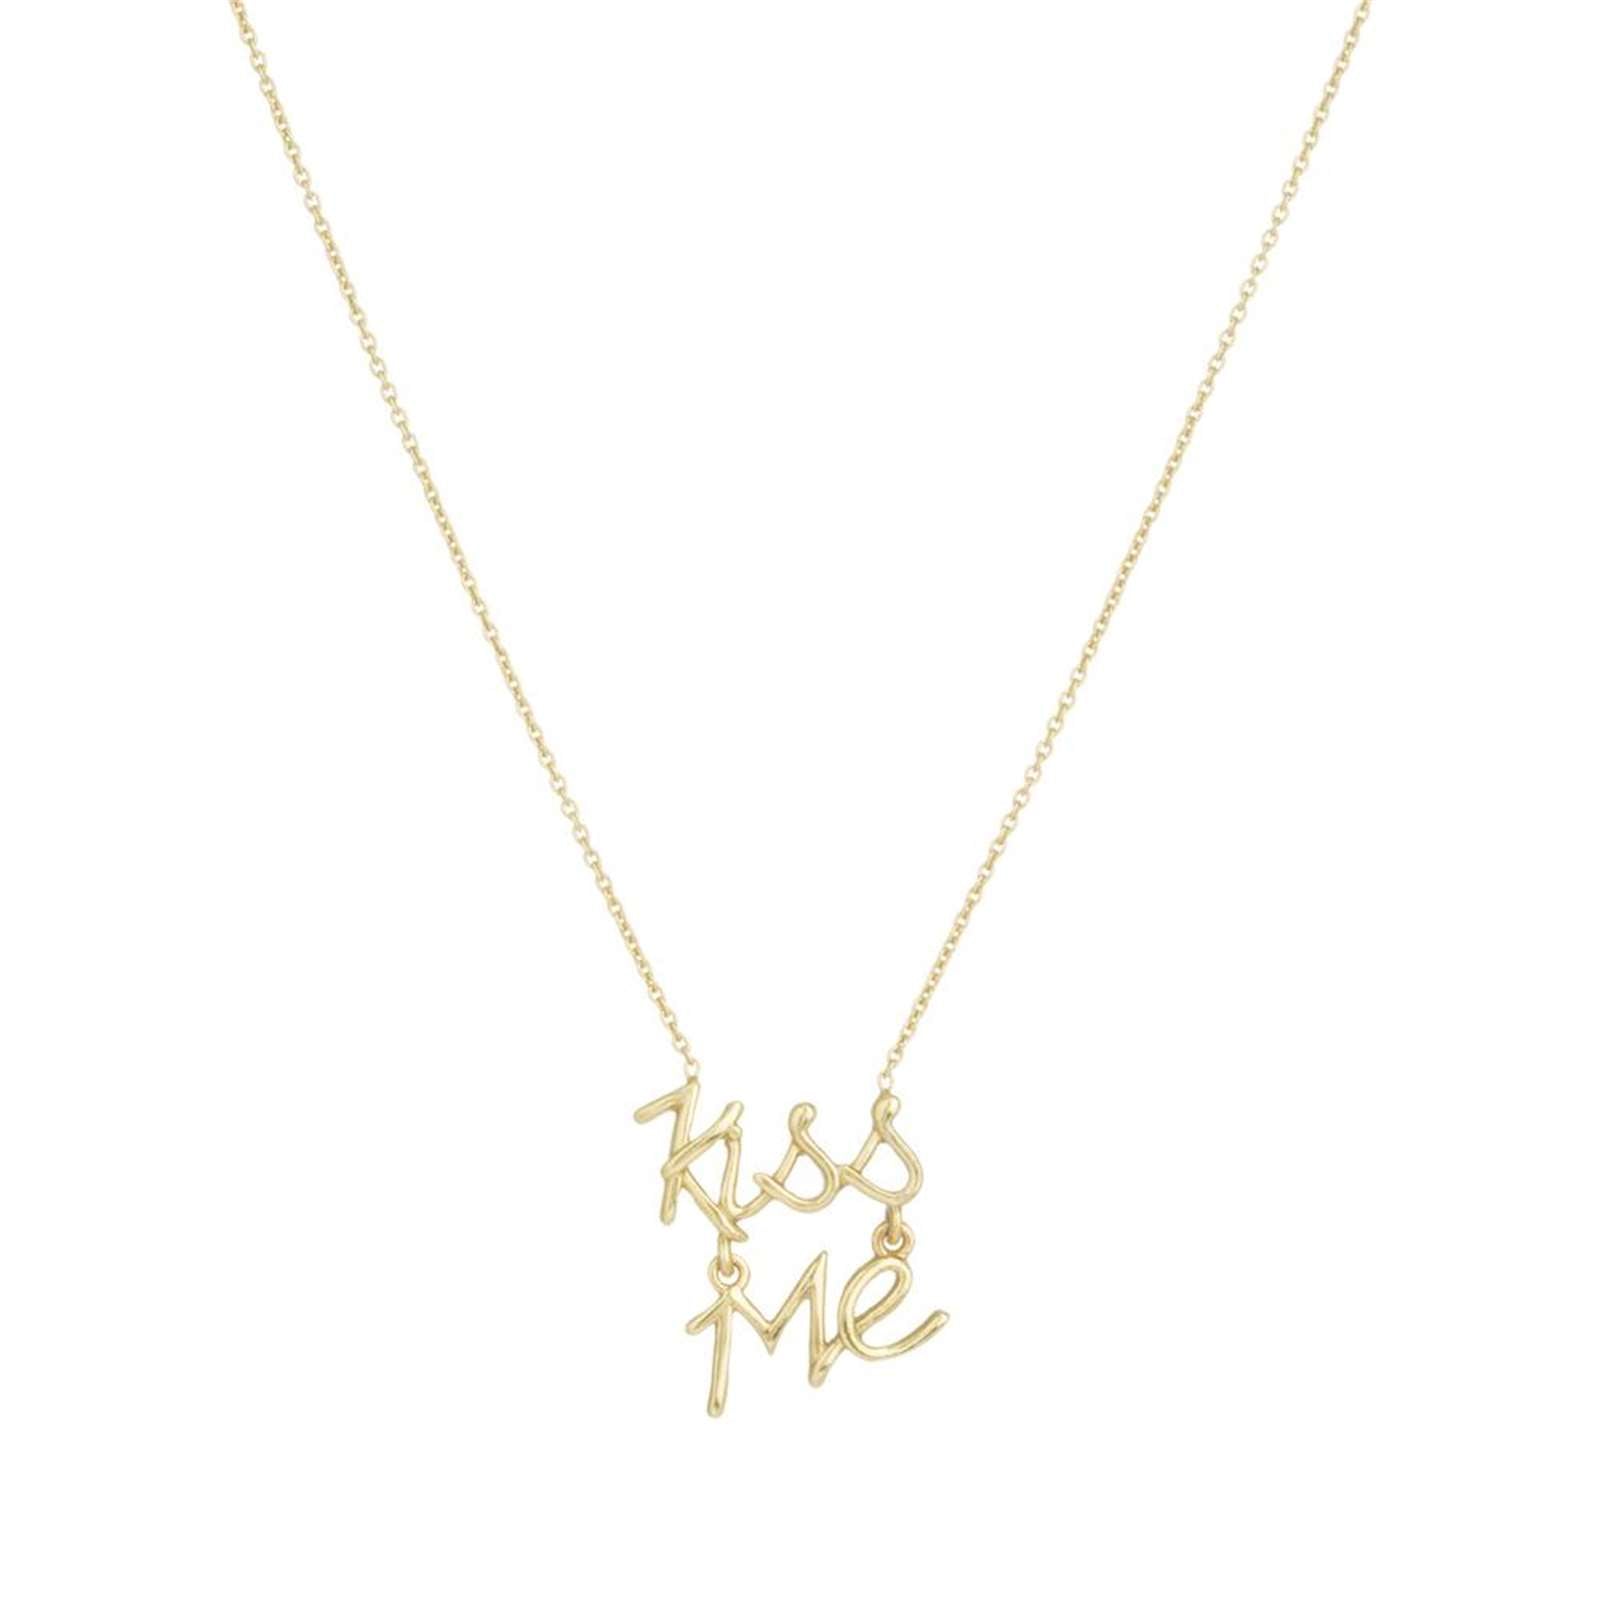 Athra Women Kiss Me Necklace With Extension